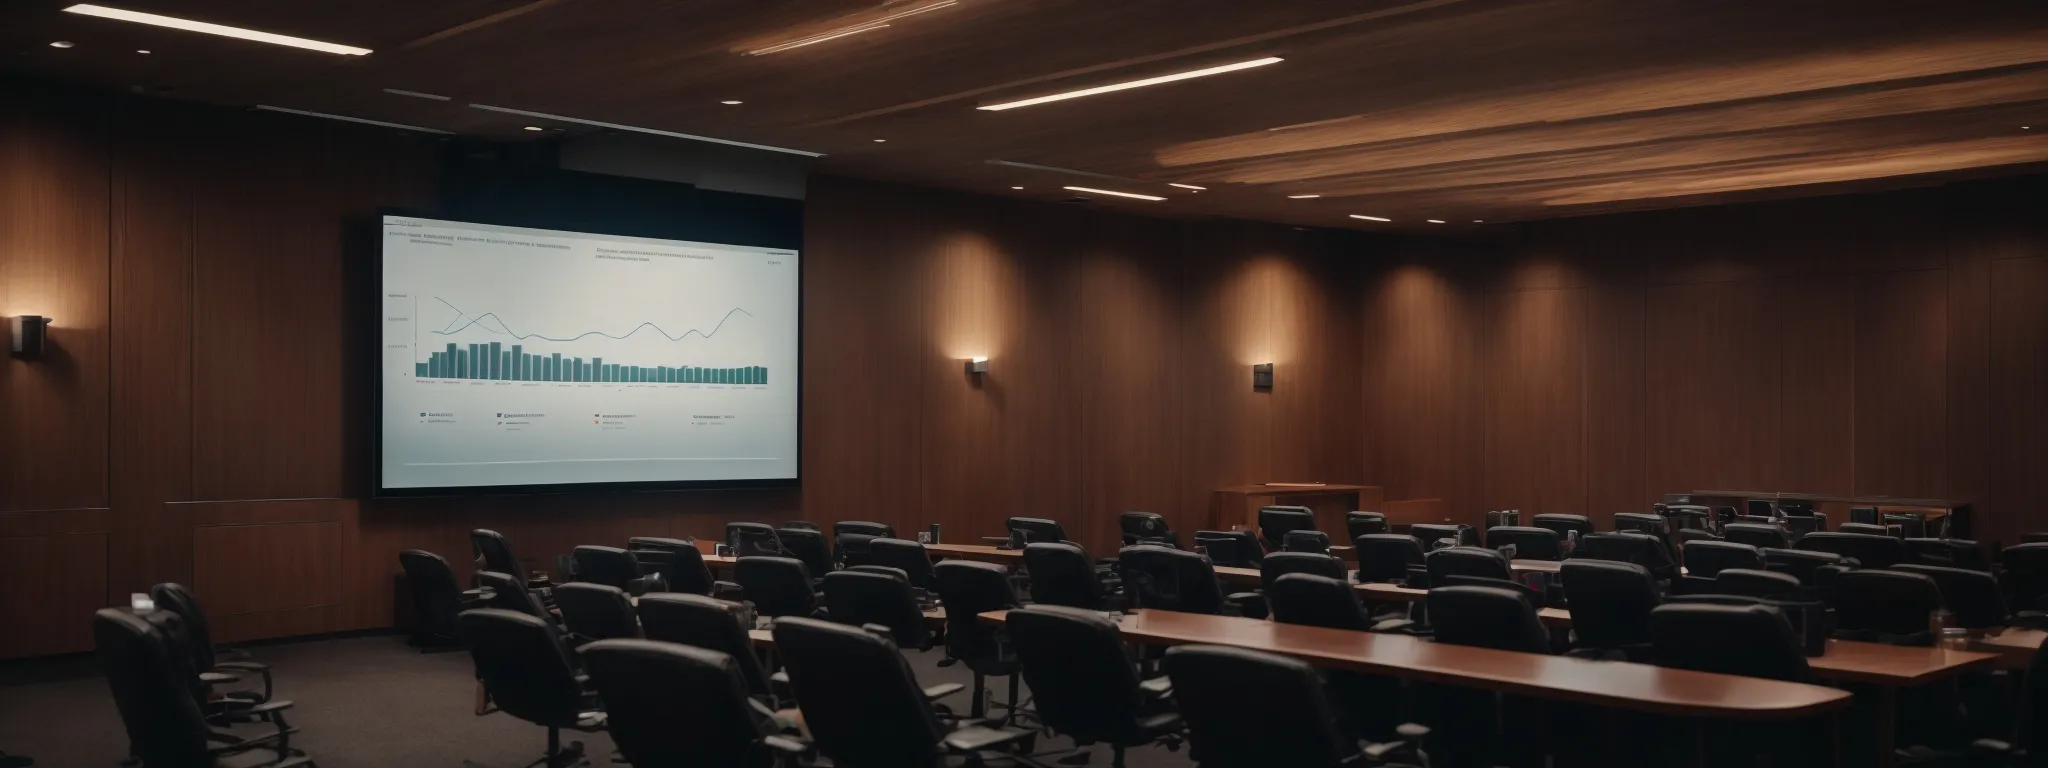 a conference room with a large screen displaying a graph of upward trend, symbolizing the growth and planning in an seo strategy meeting.